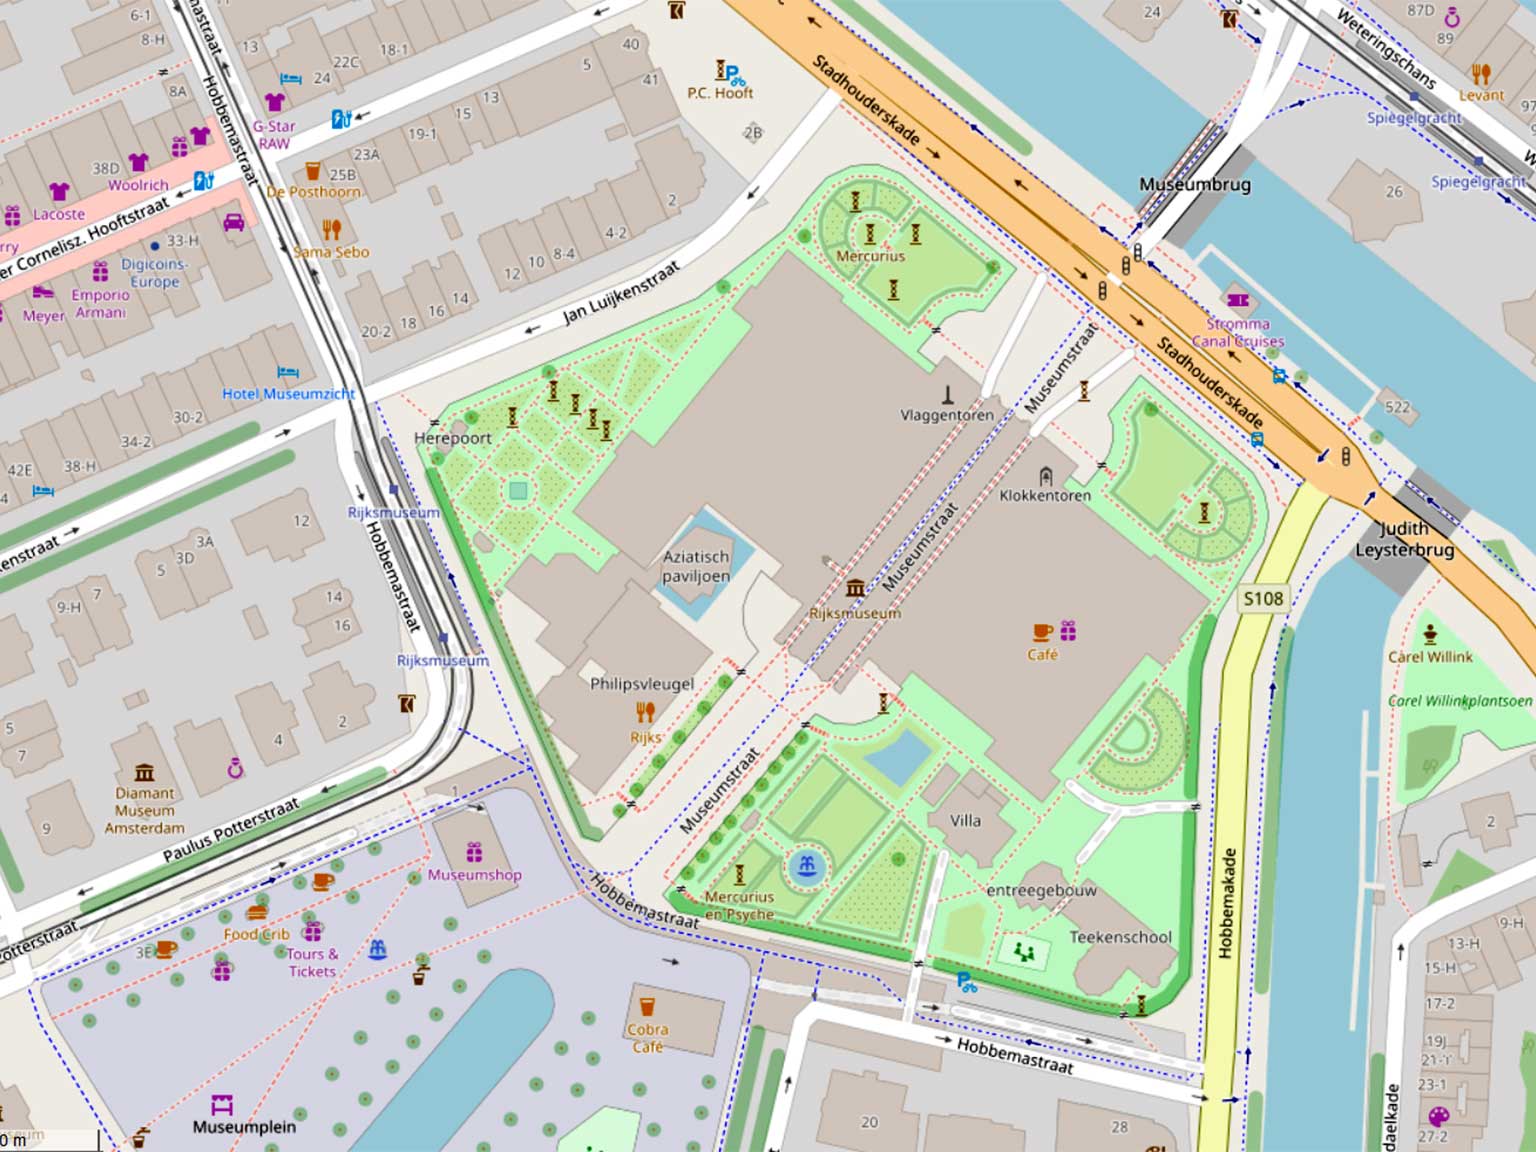 Map of the Rijksmuseum, Amsterdam with Museumstraat and gardens